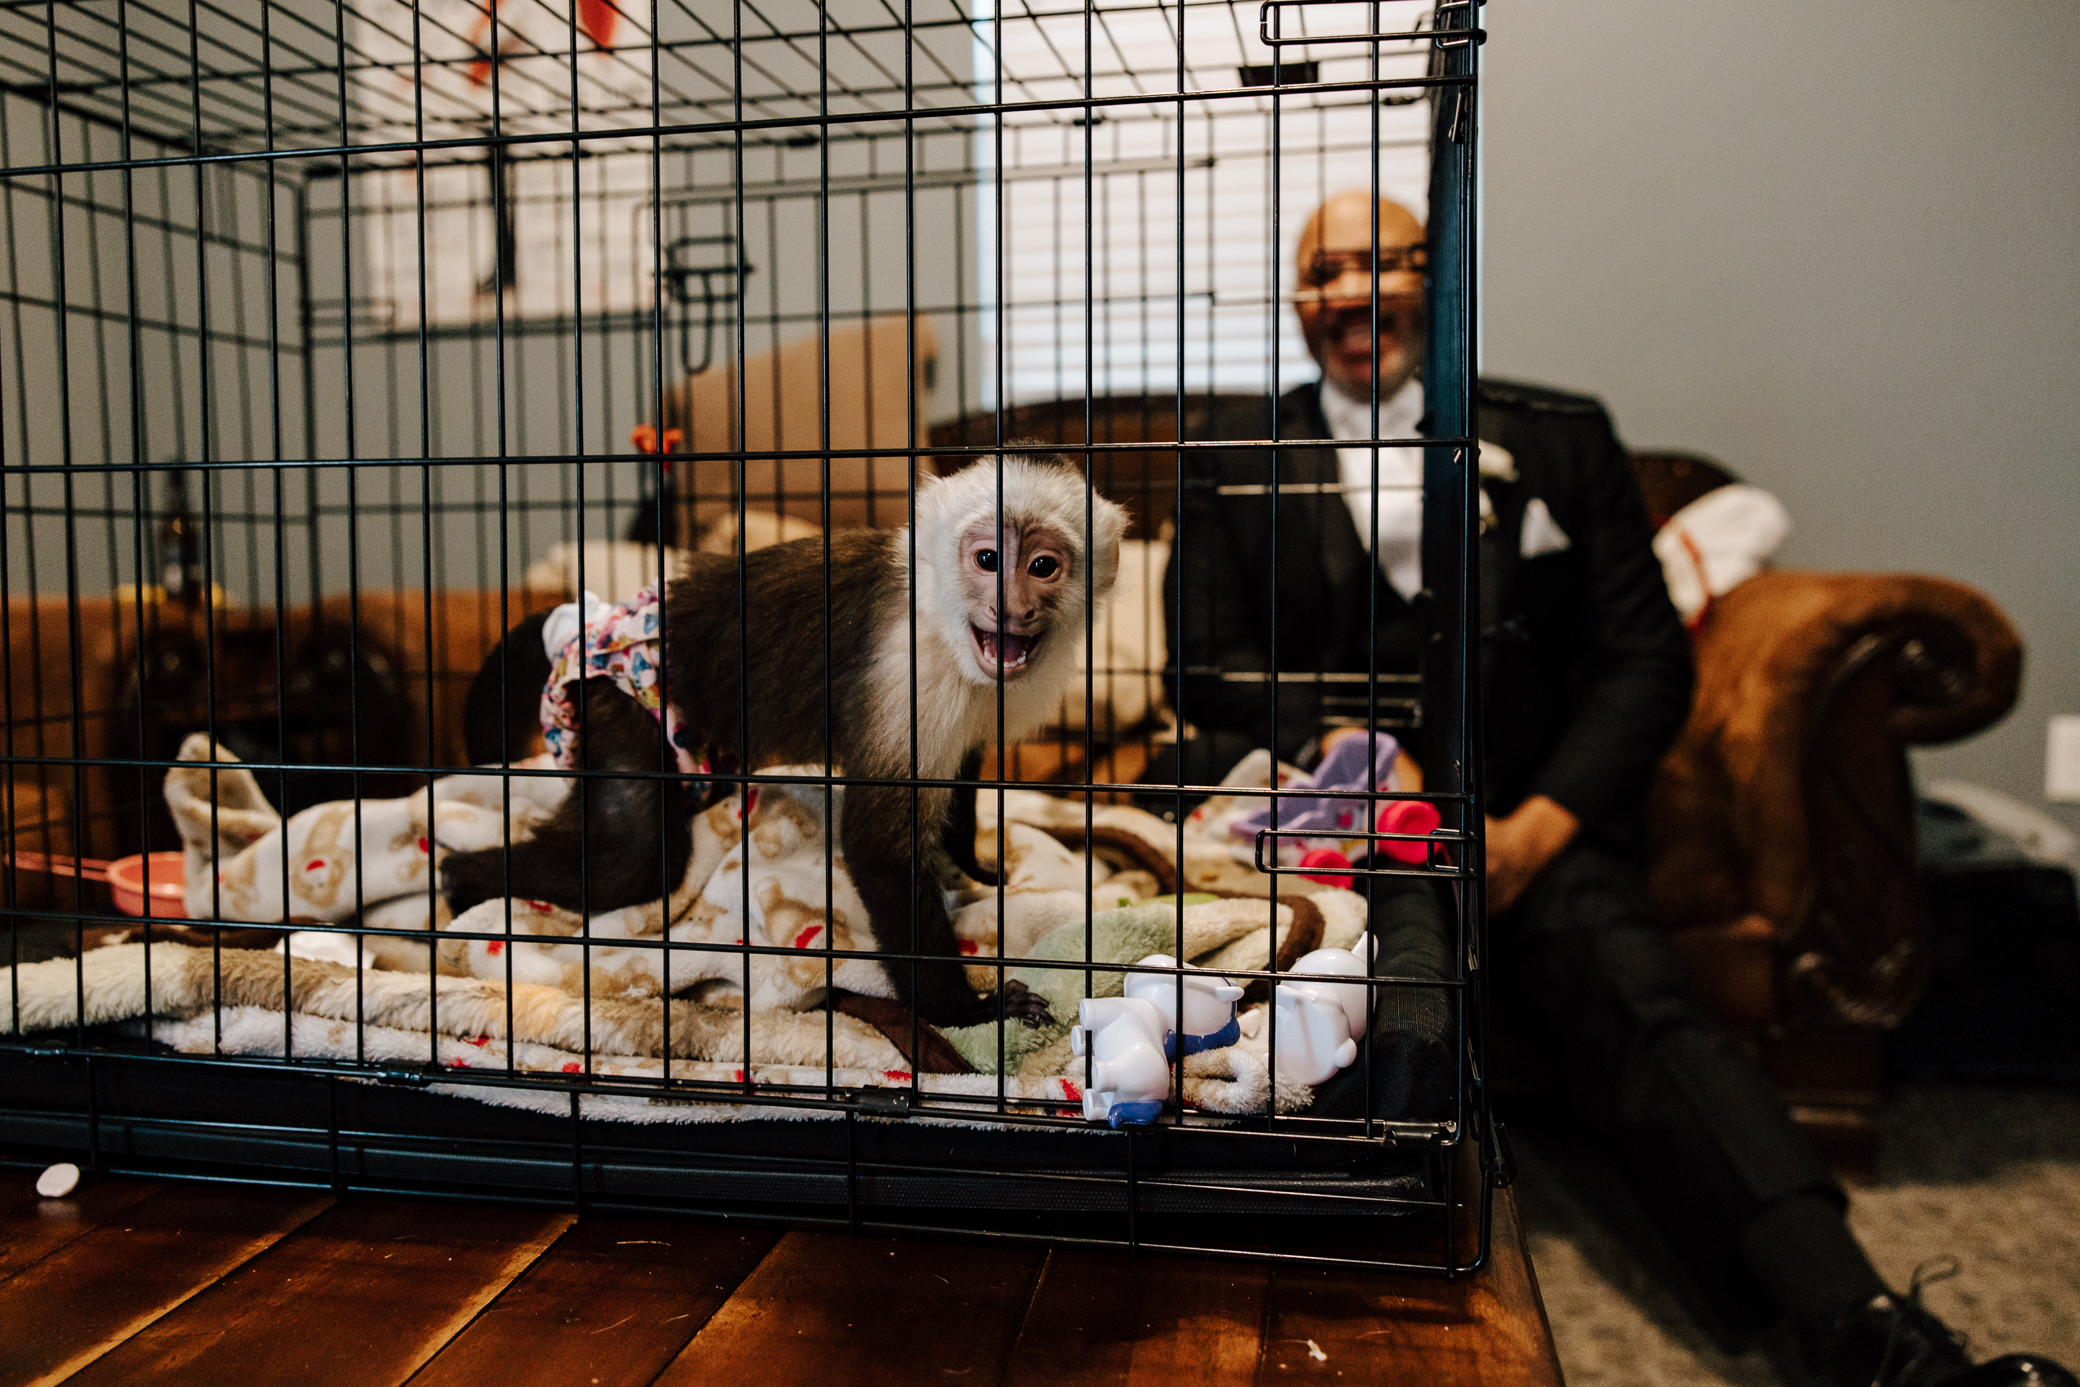 A capuchin monkey is seen in a black wire dog crate with its owner smiling behind it in the groom's quarters.